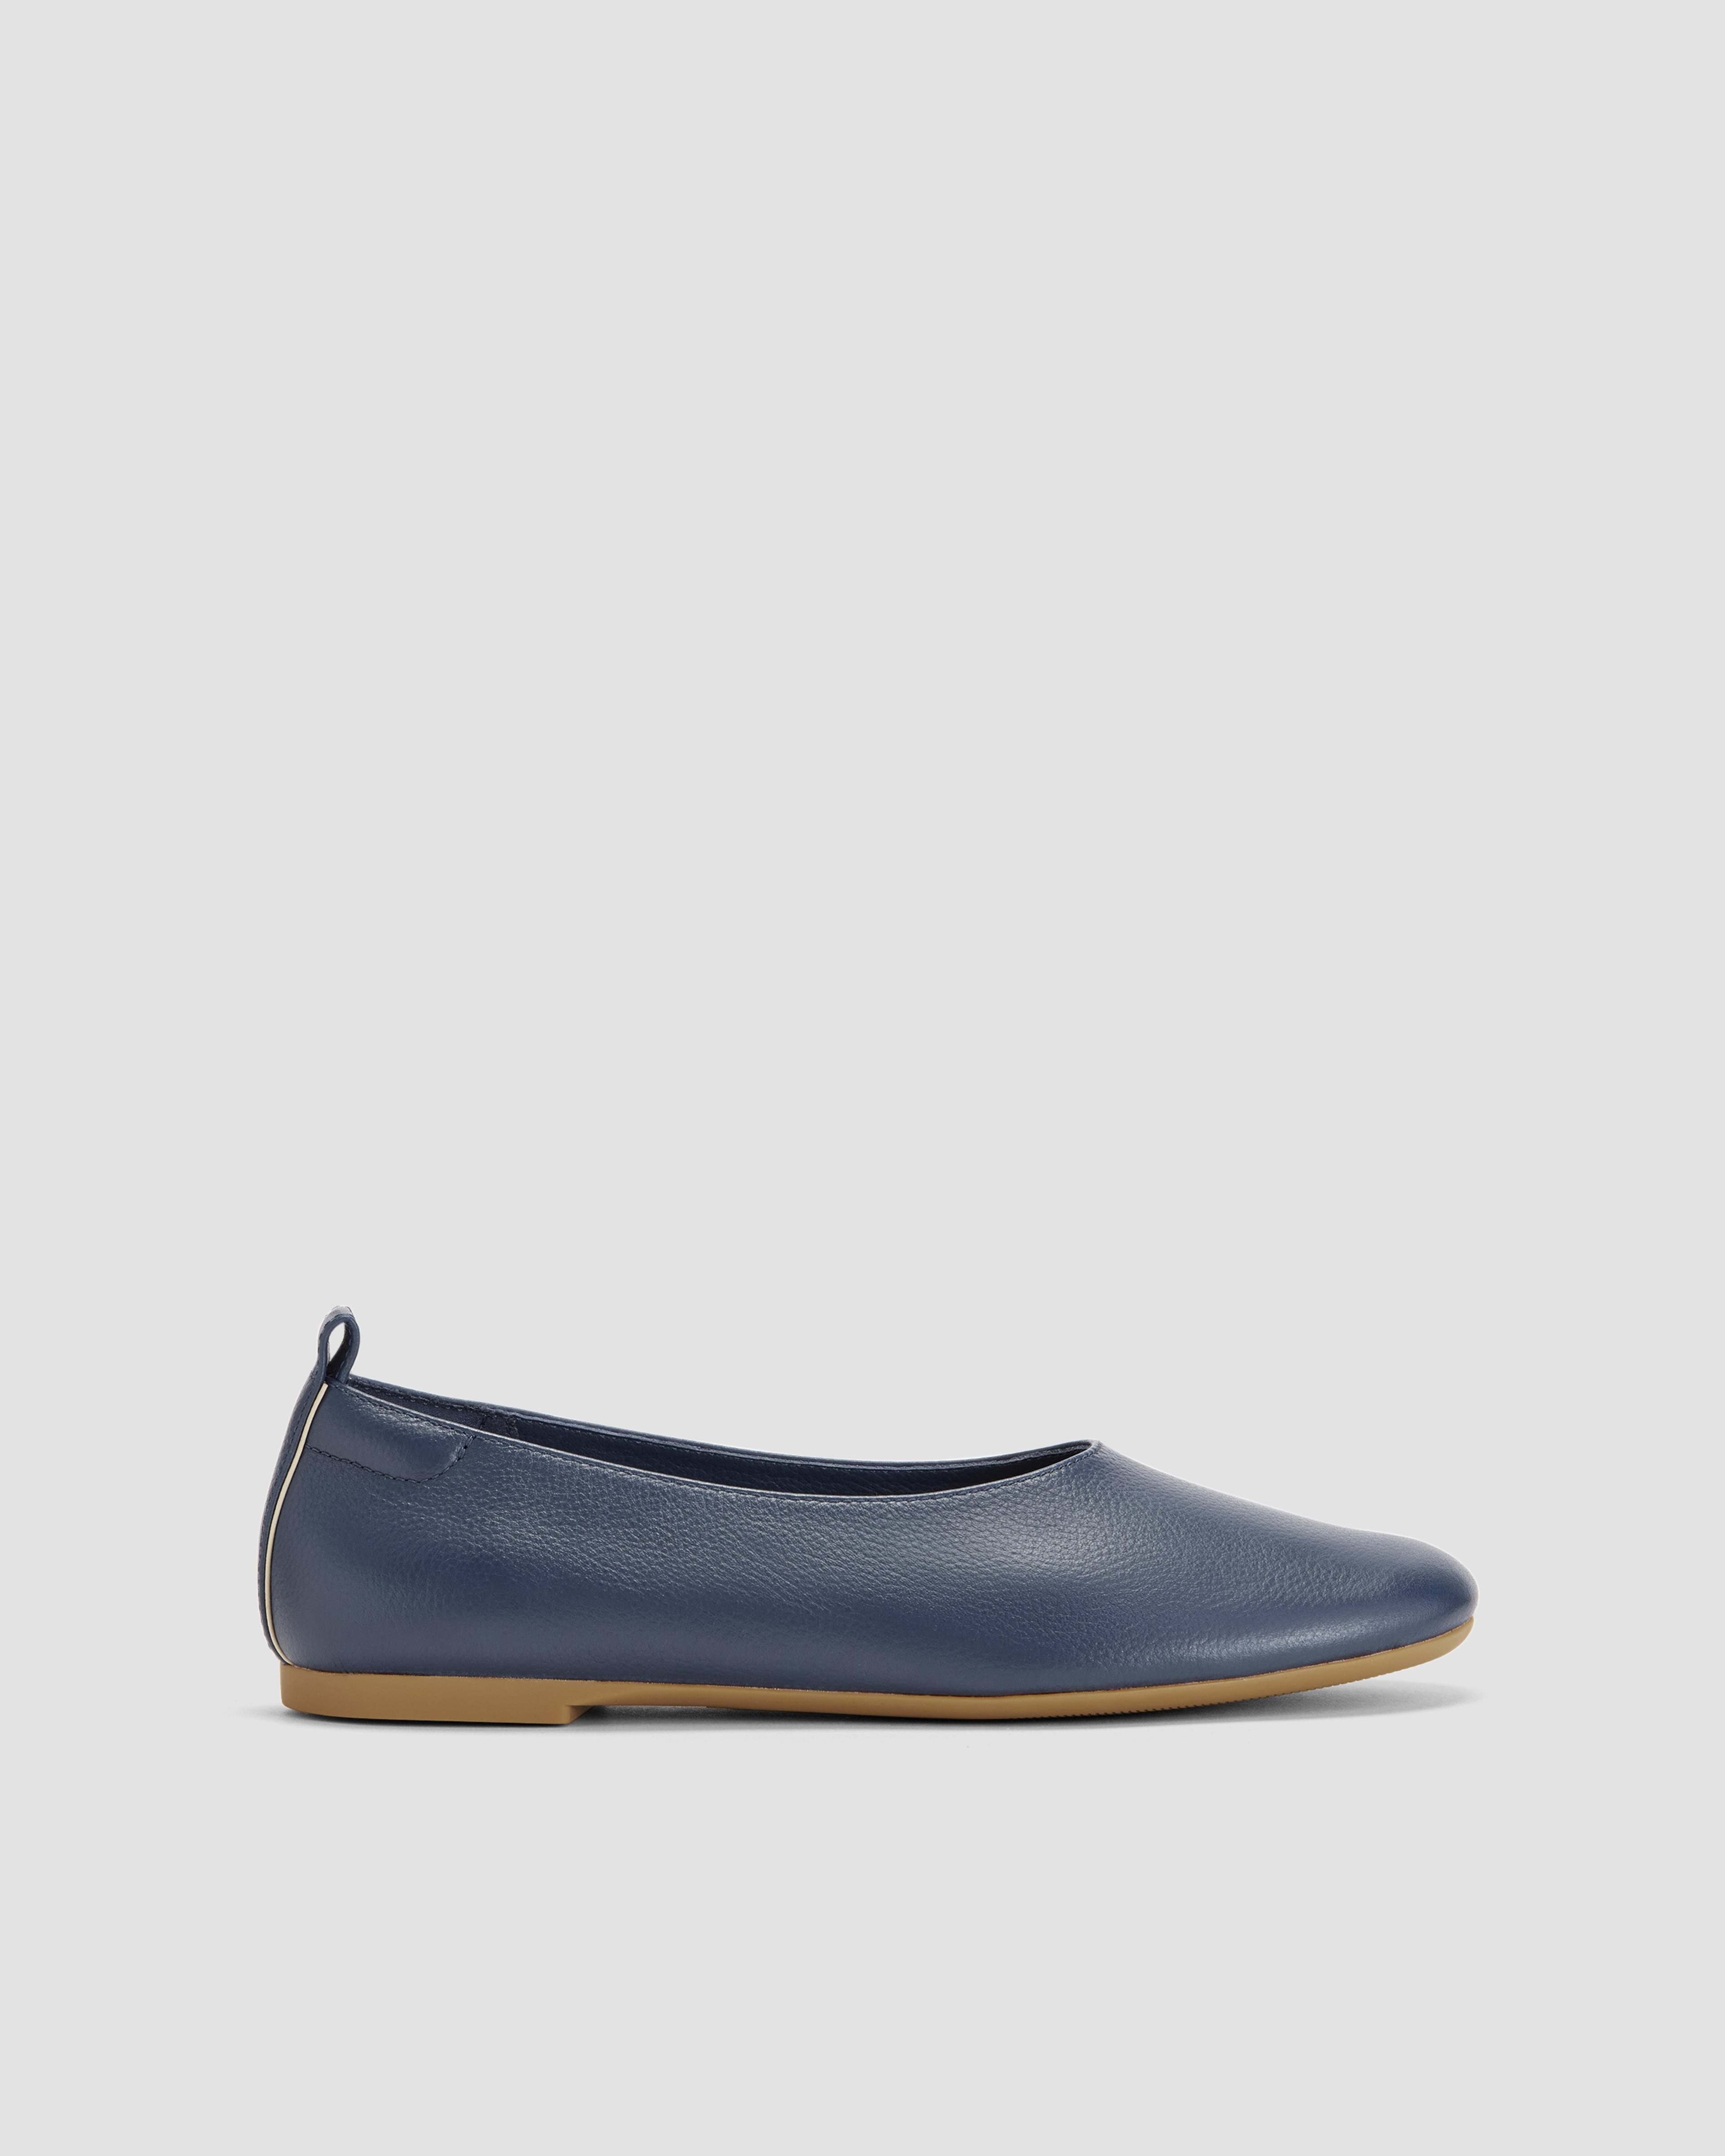 Everlane ReNew Slippers Review